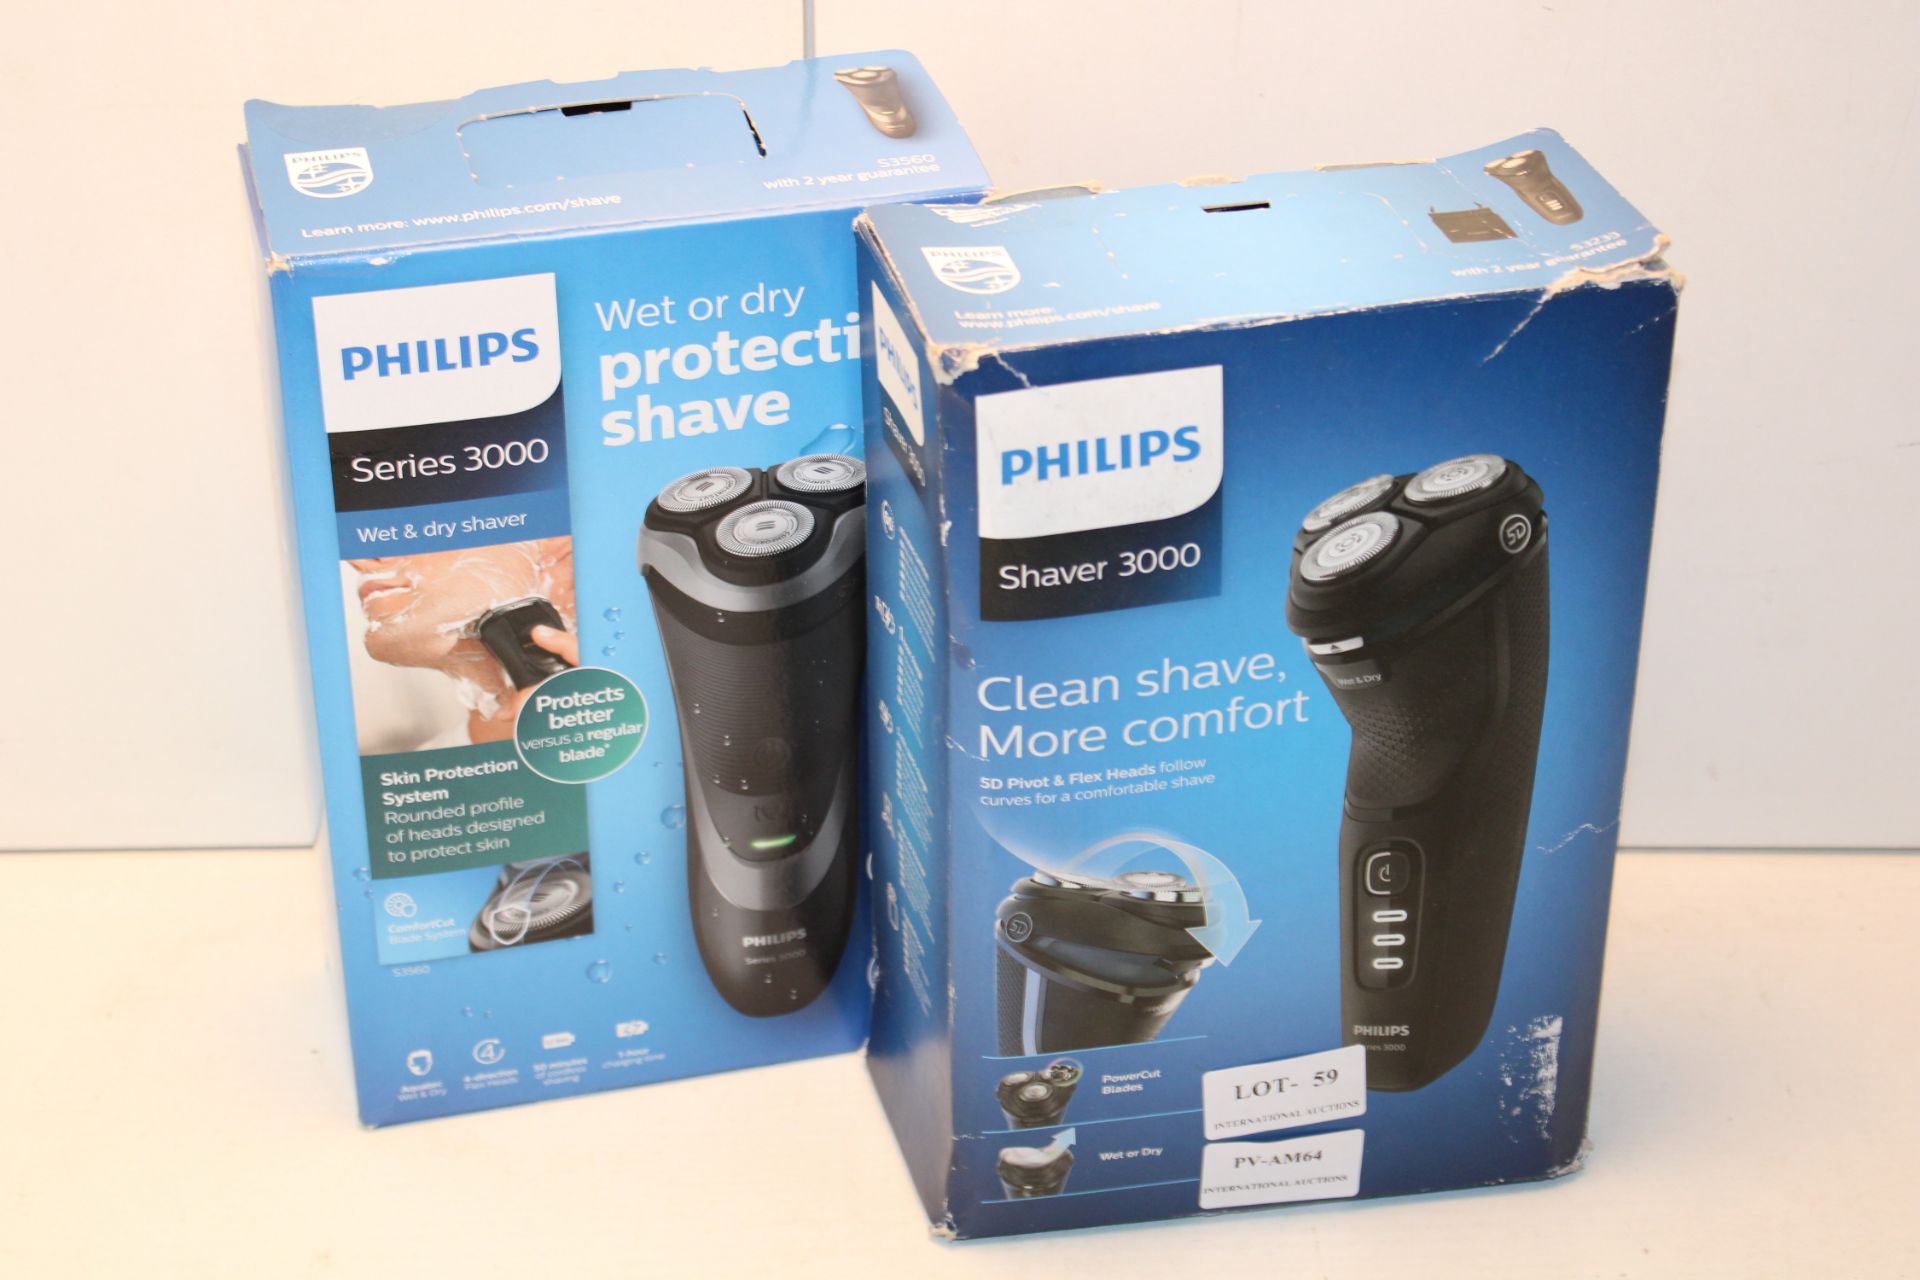 2X BOXED PHILIPS SERIES 3000 WET & DRY SHAVER COMBINED RRP £120.00Condition ReportAppraisal